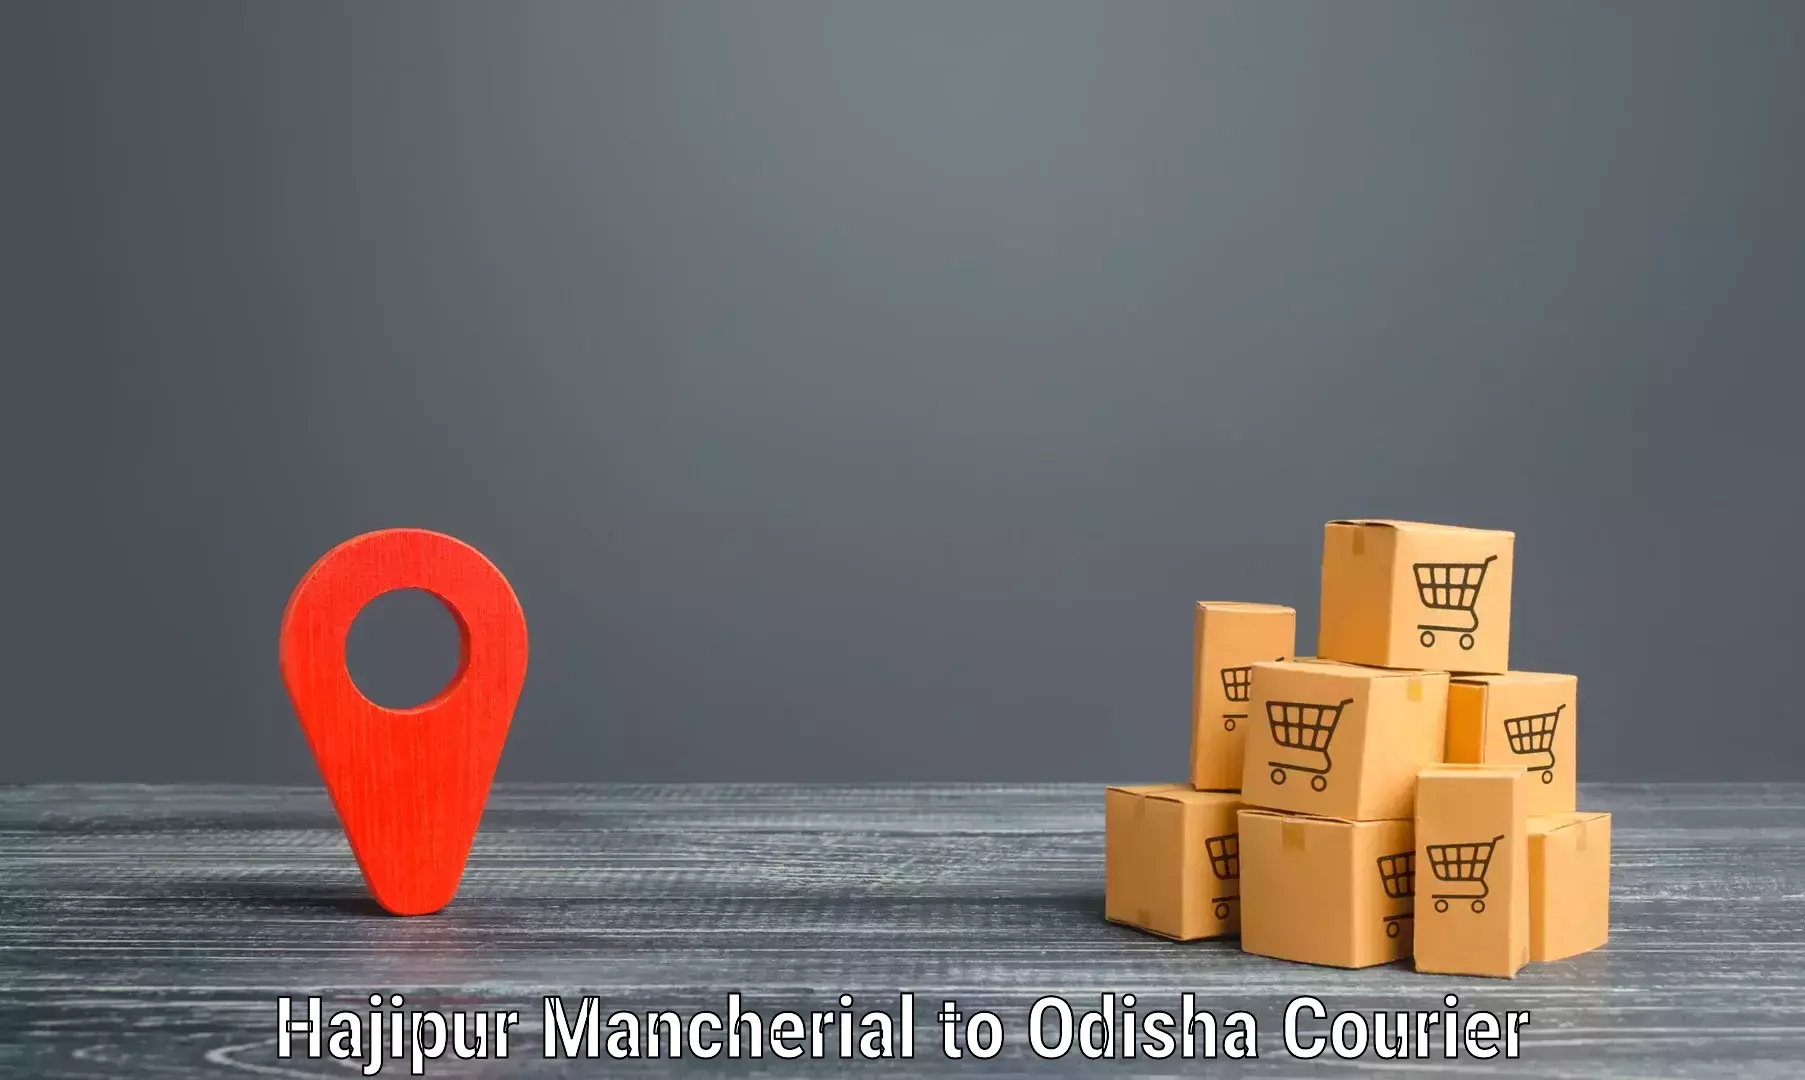 Local delivery service Hajipur Mancherial to Chandinchowk